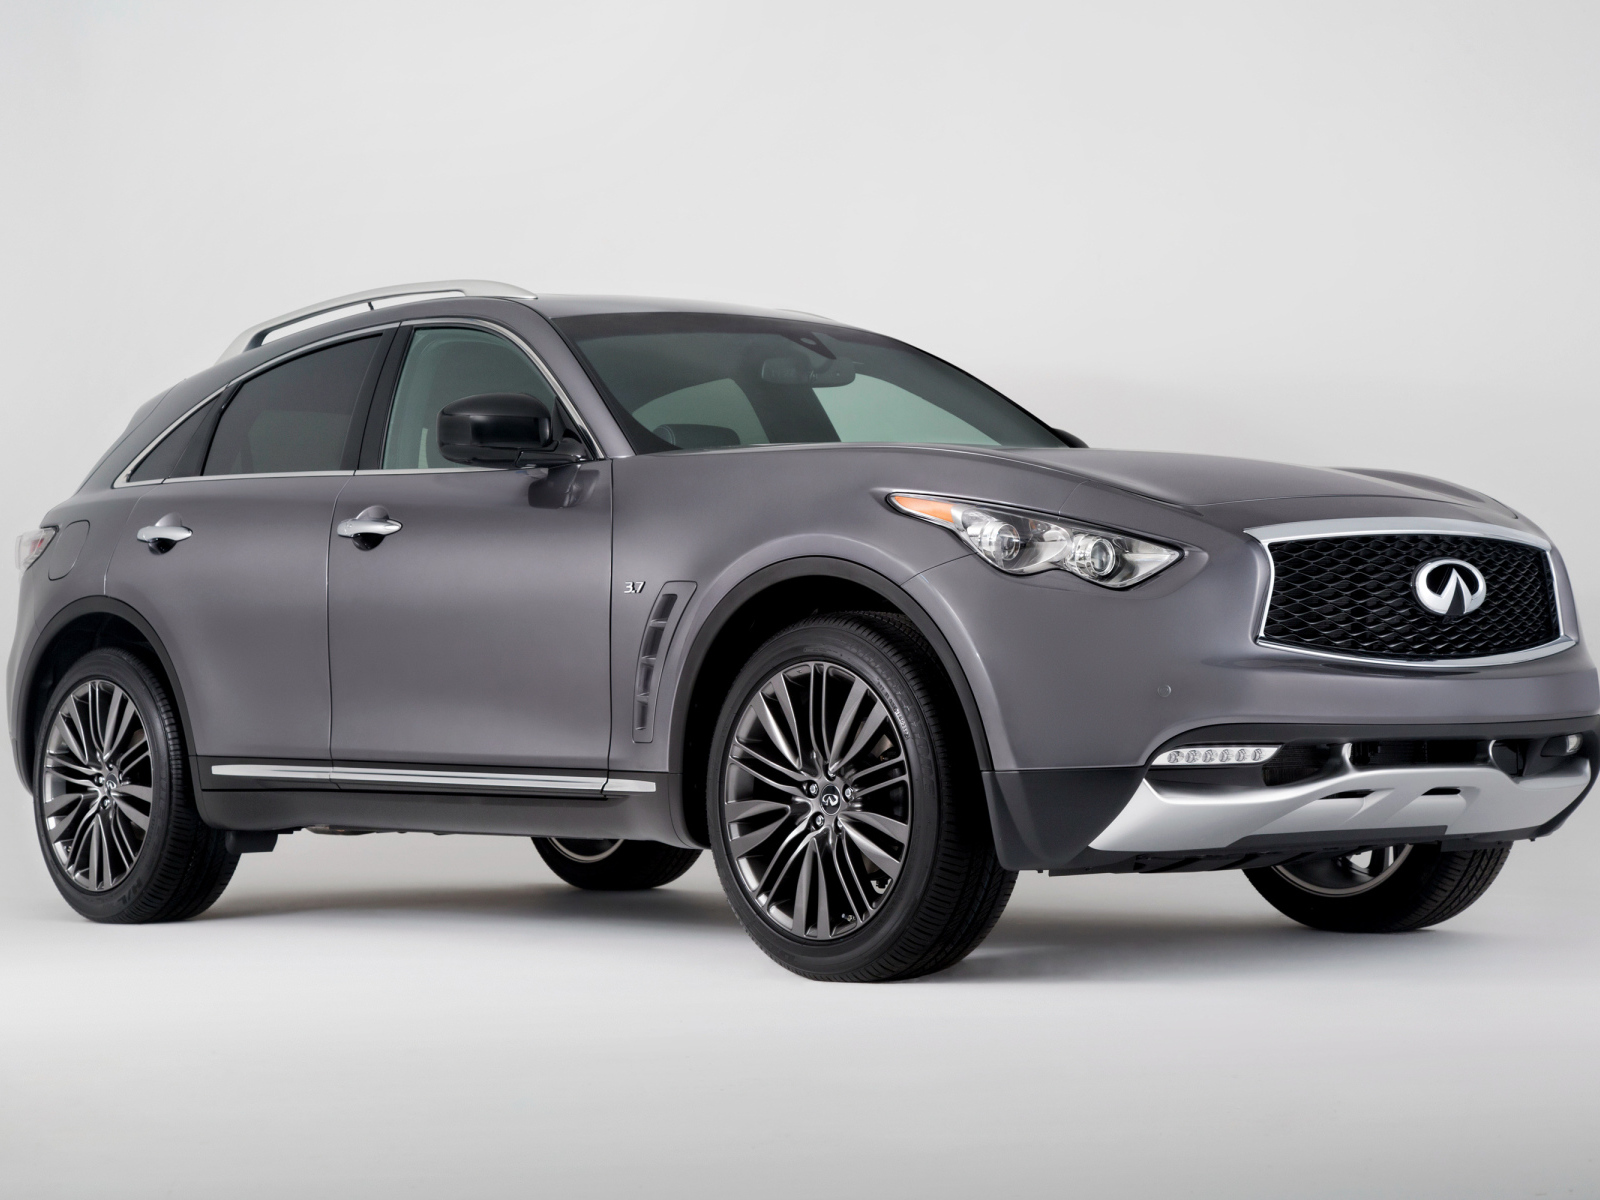 Silver car Infiniti QX70 on a gray background